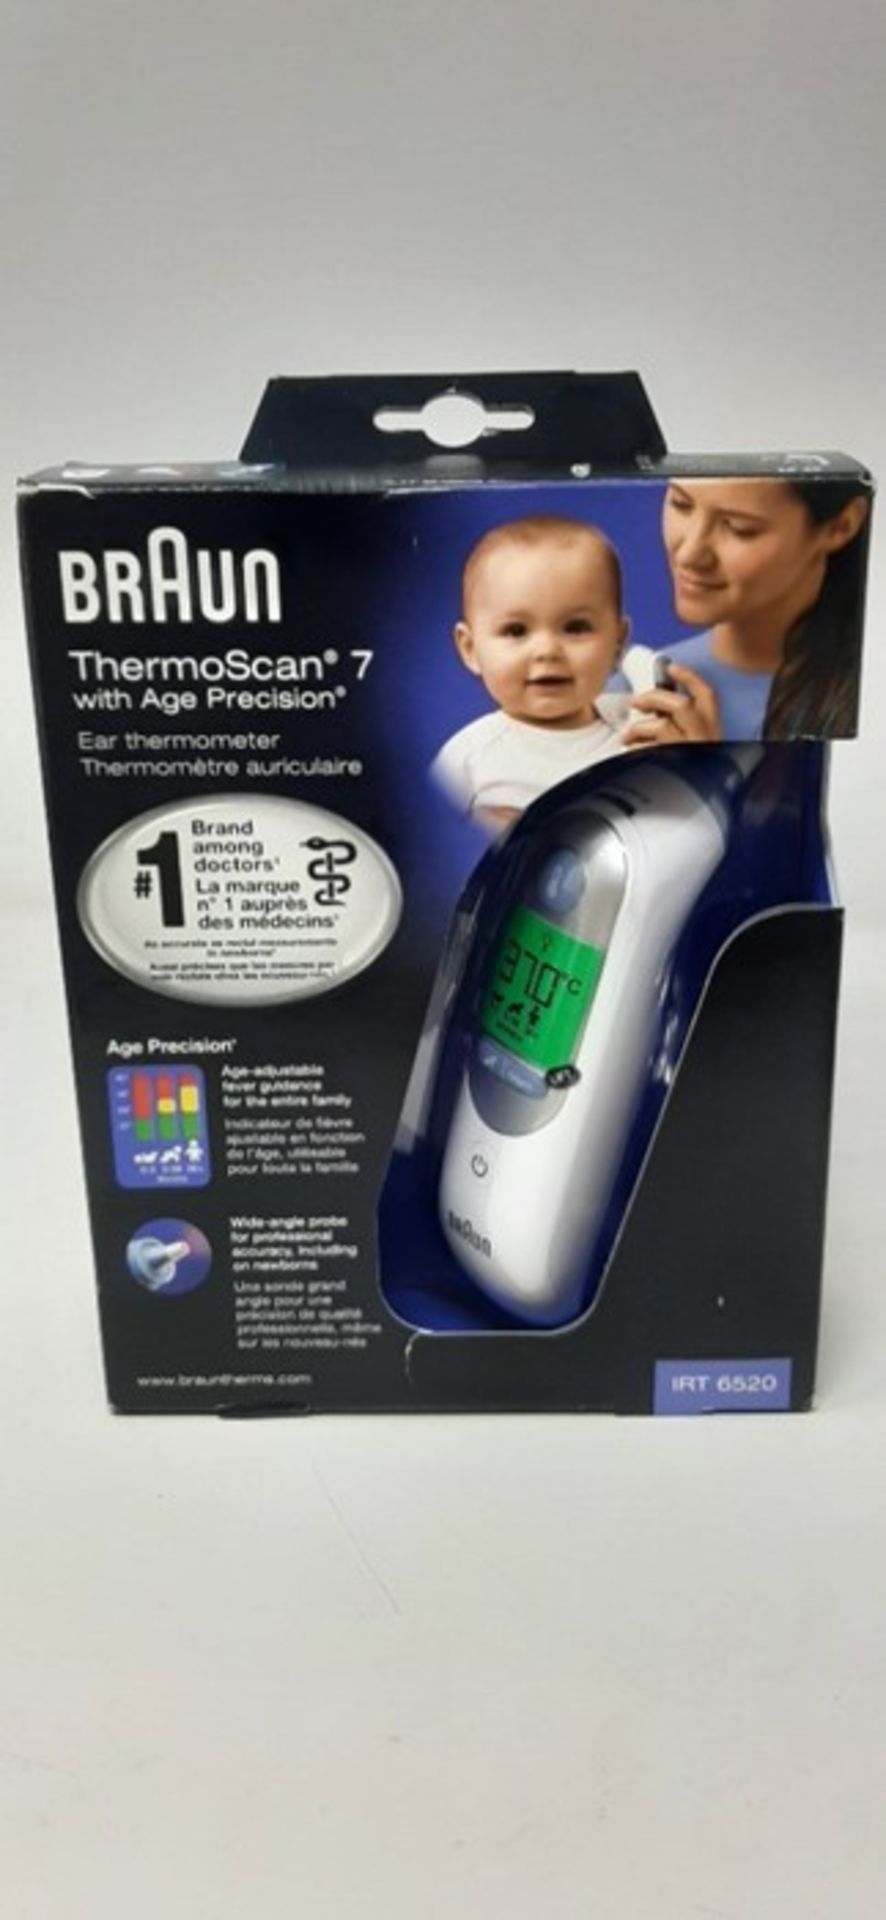 Braun Thermoscan 7 IRT6520 Thermometer - Image 2 of 2